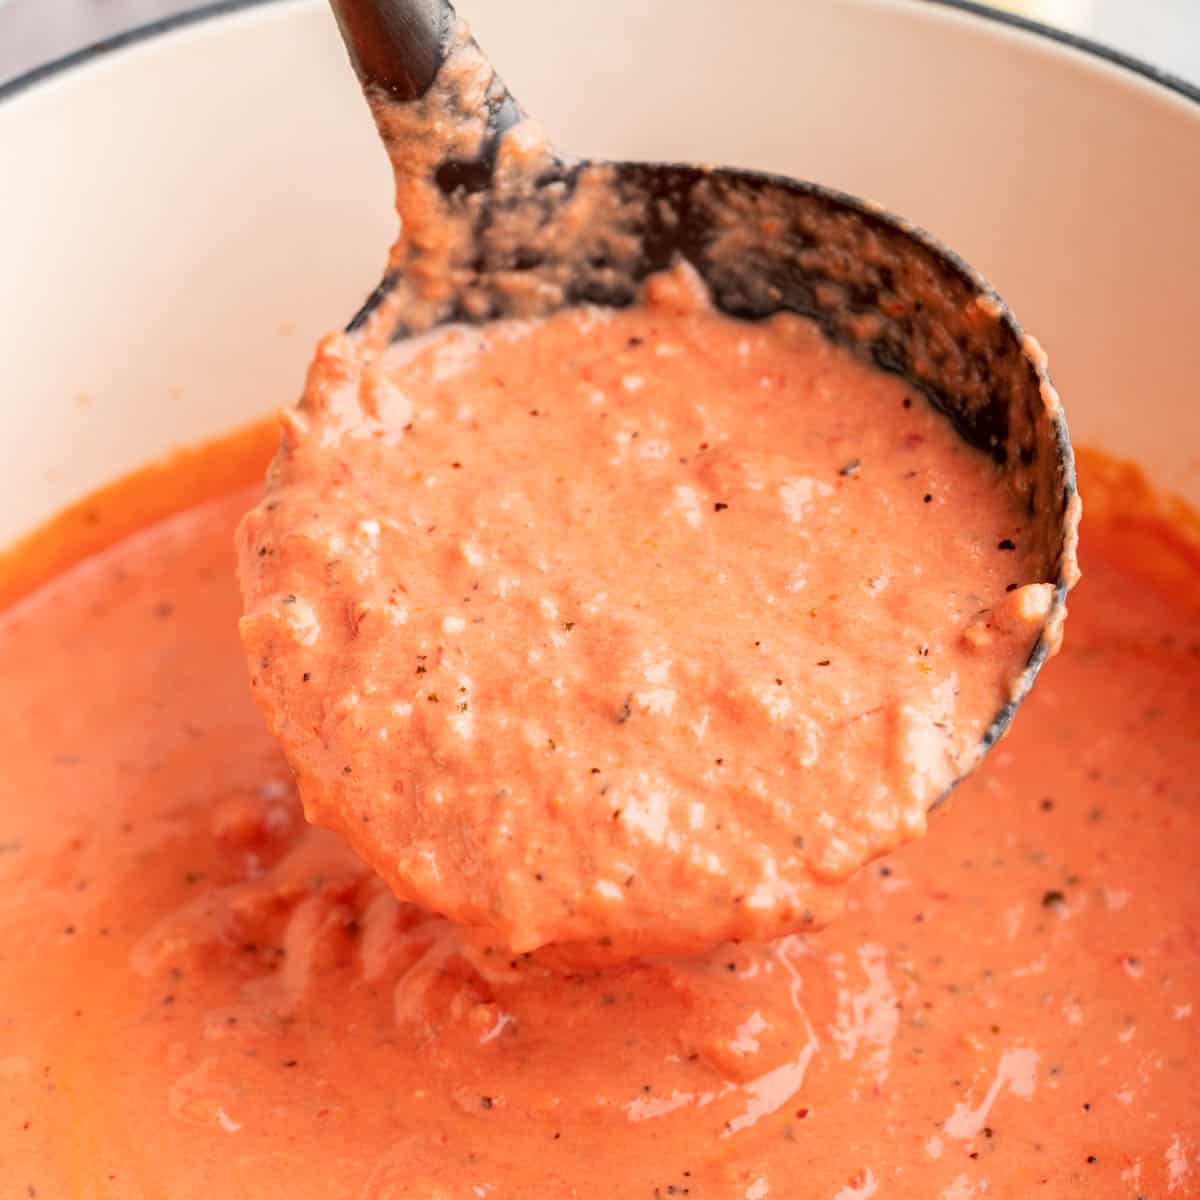 A close up view of a ladle of vodka sauce being scooped out of the pan.